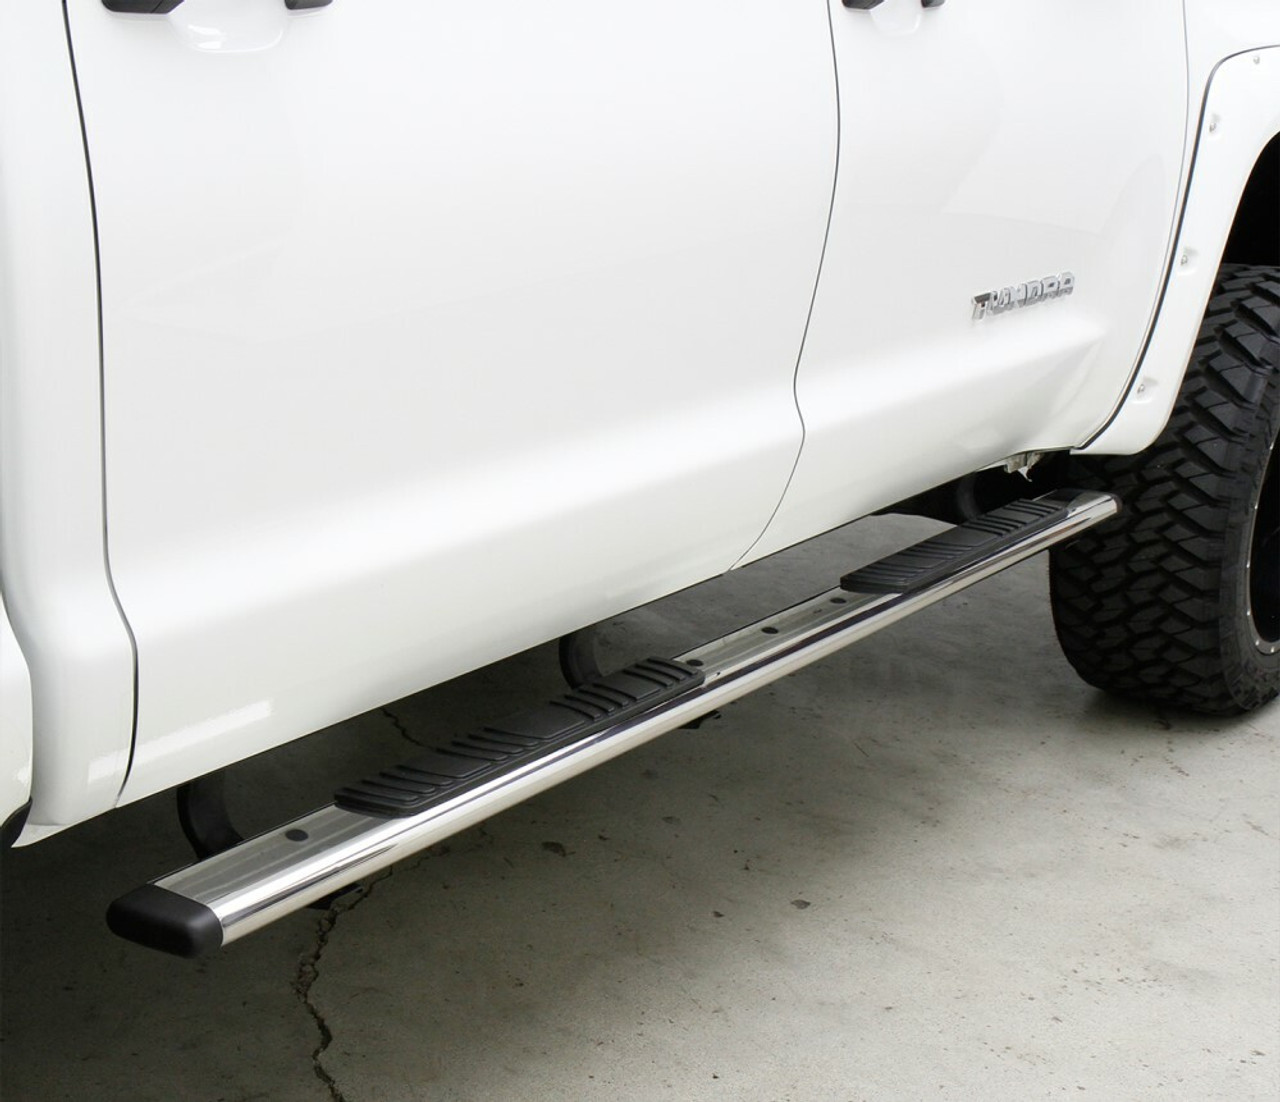 Go Rhino 685409987PS RAM 2500HD, 3500HD, 2010 - 2021, 5 inch OE Xtreme Low Profile - Complete Kit: Sidesteps + Brackets, Stainless steel, Polished, 650087PS side bars + 6840995 OE Xtreme Brackets. 5 inch wide x 87 inch long side bars